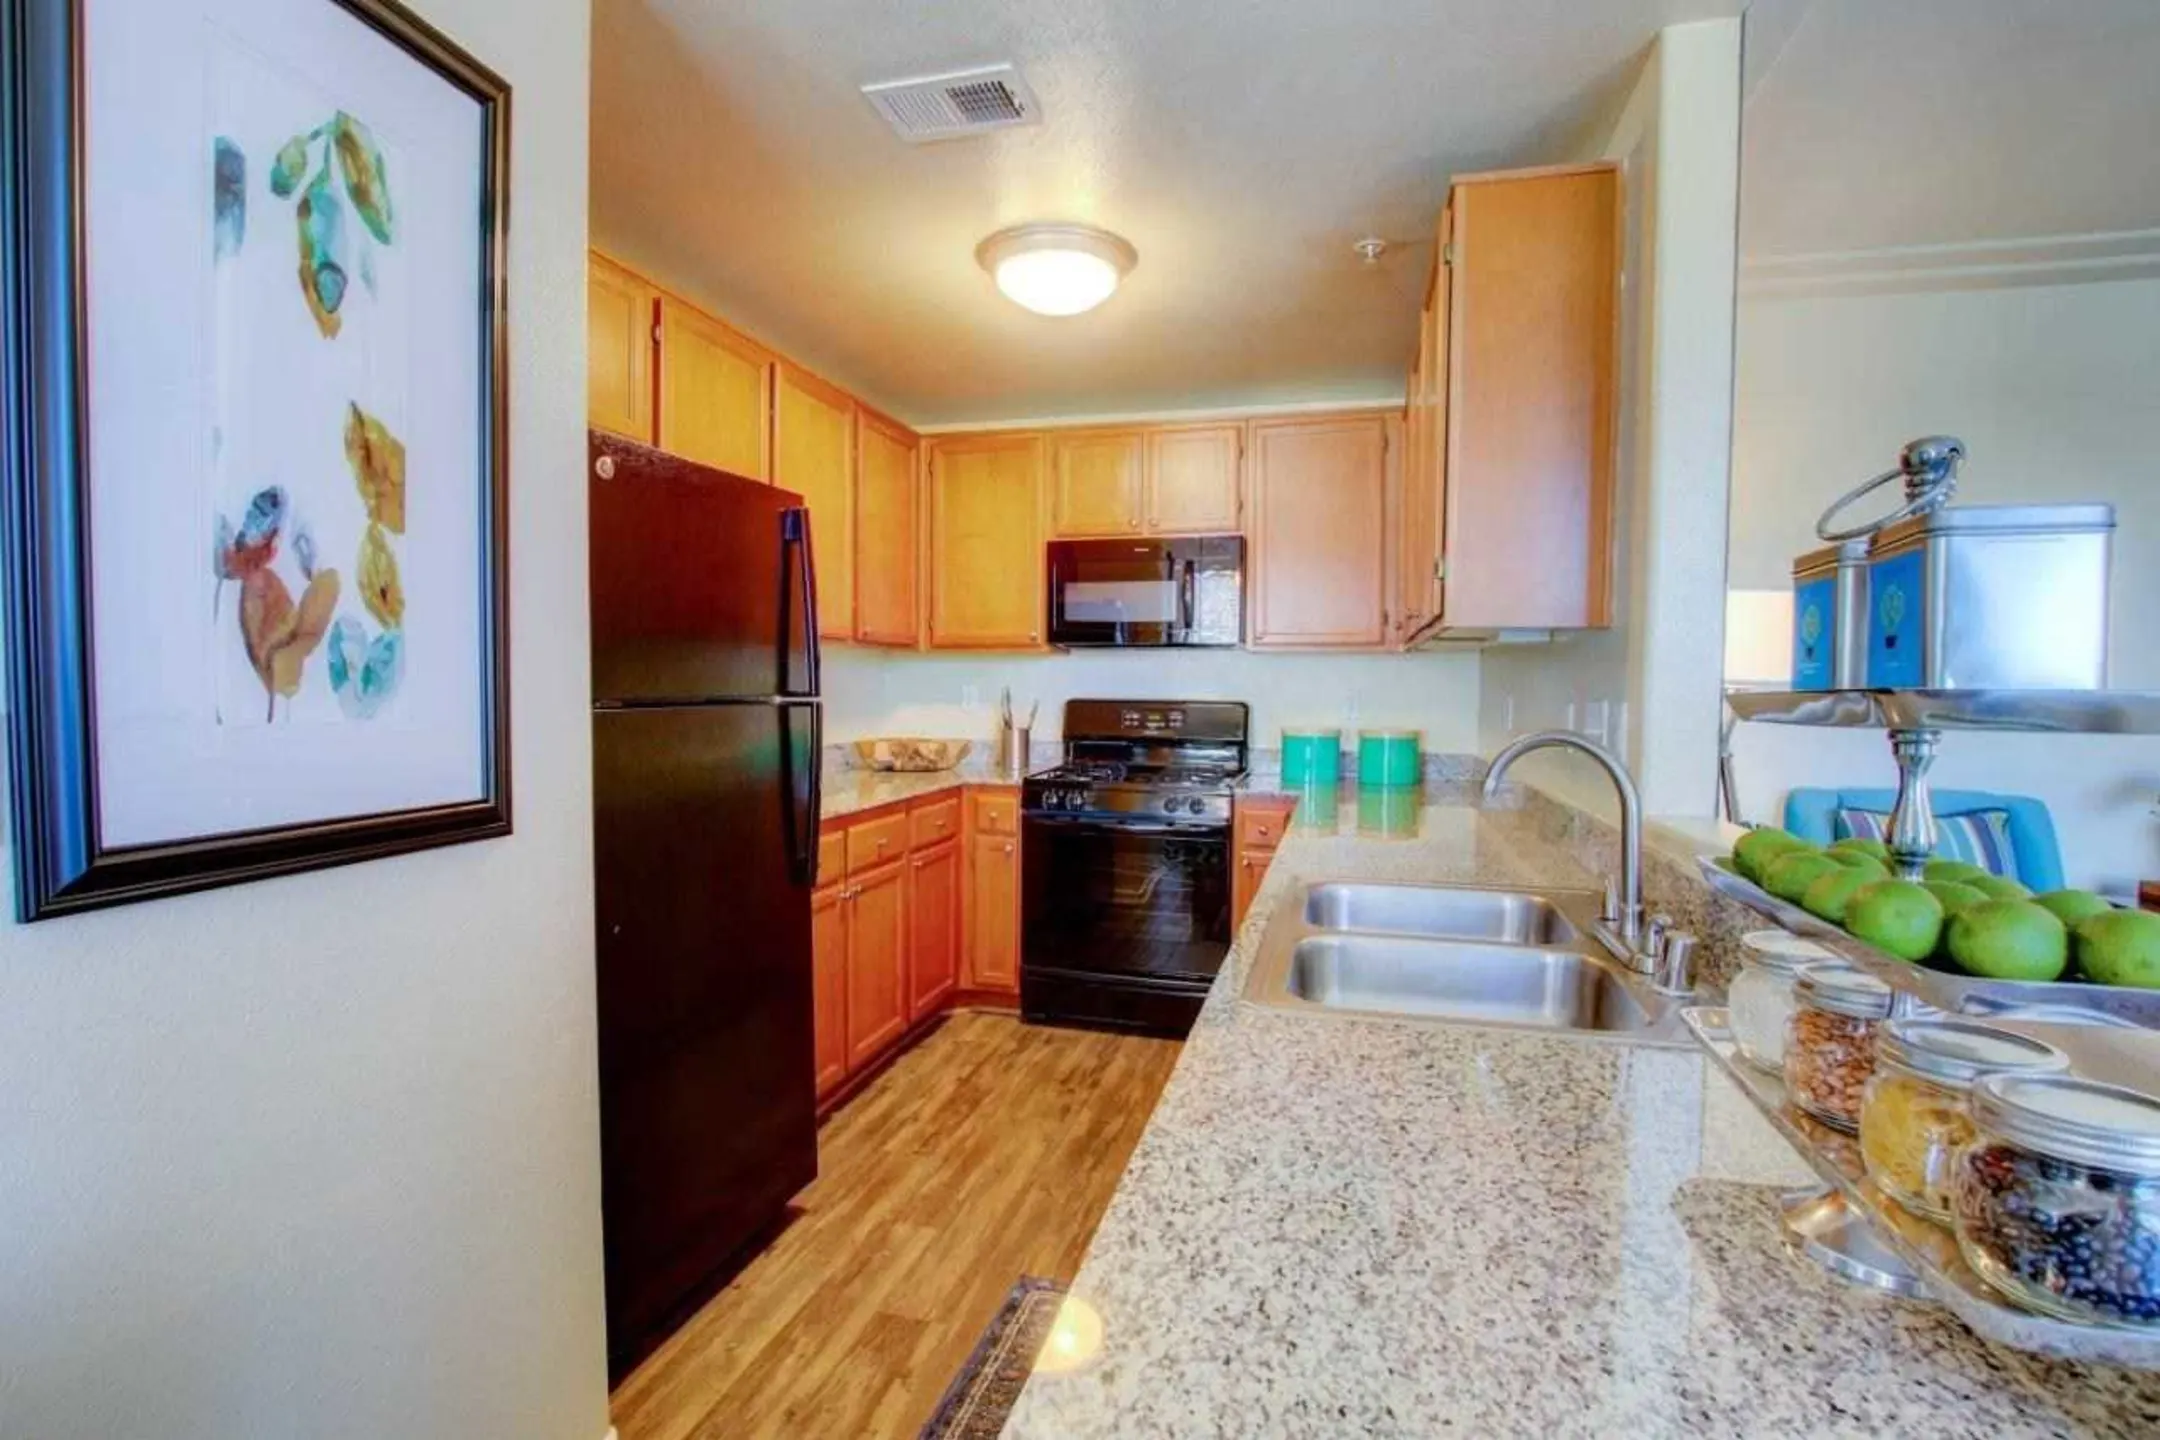 Kitchen - Prominence Apartments - San Marcos, CA